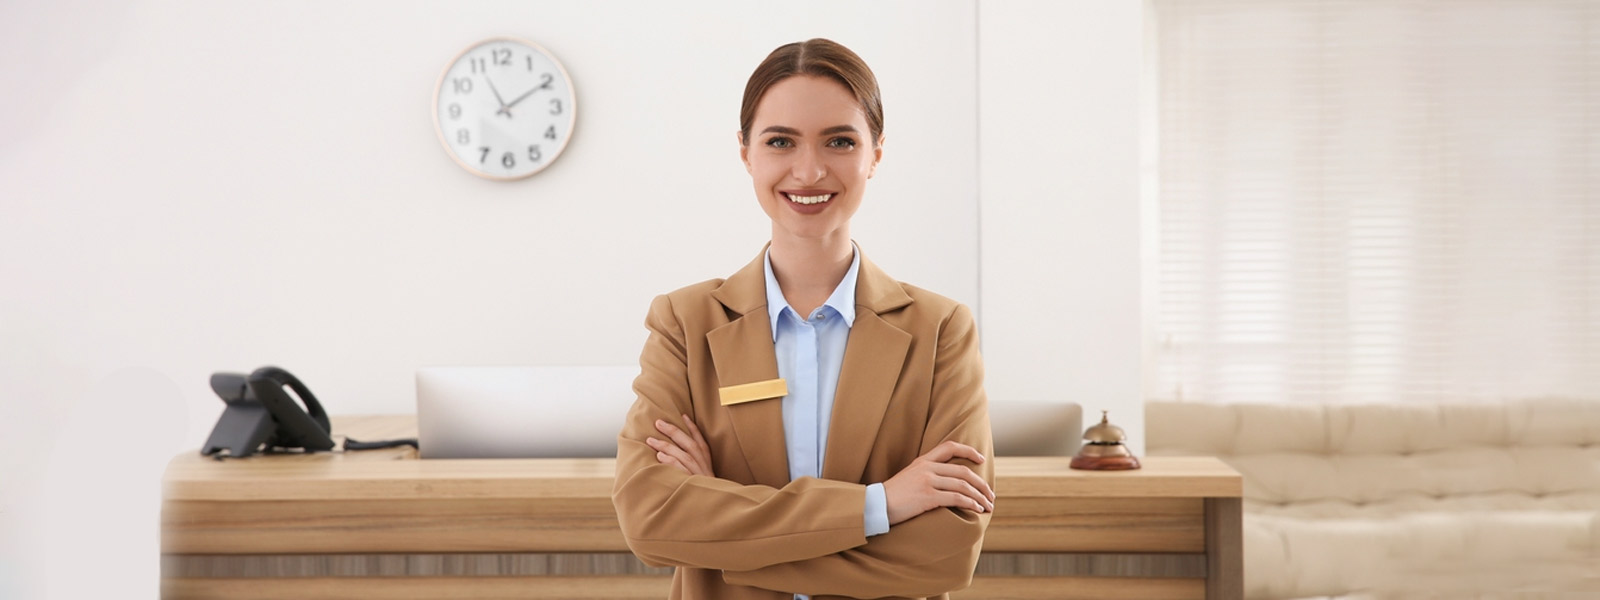 Customer Service in the Hotel Industry